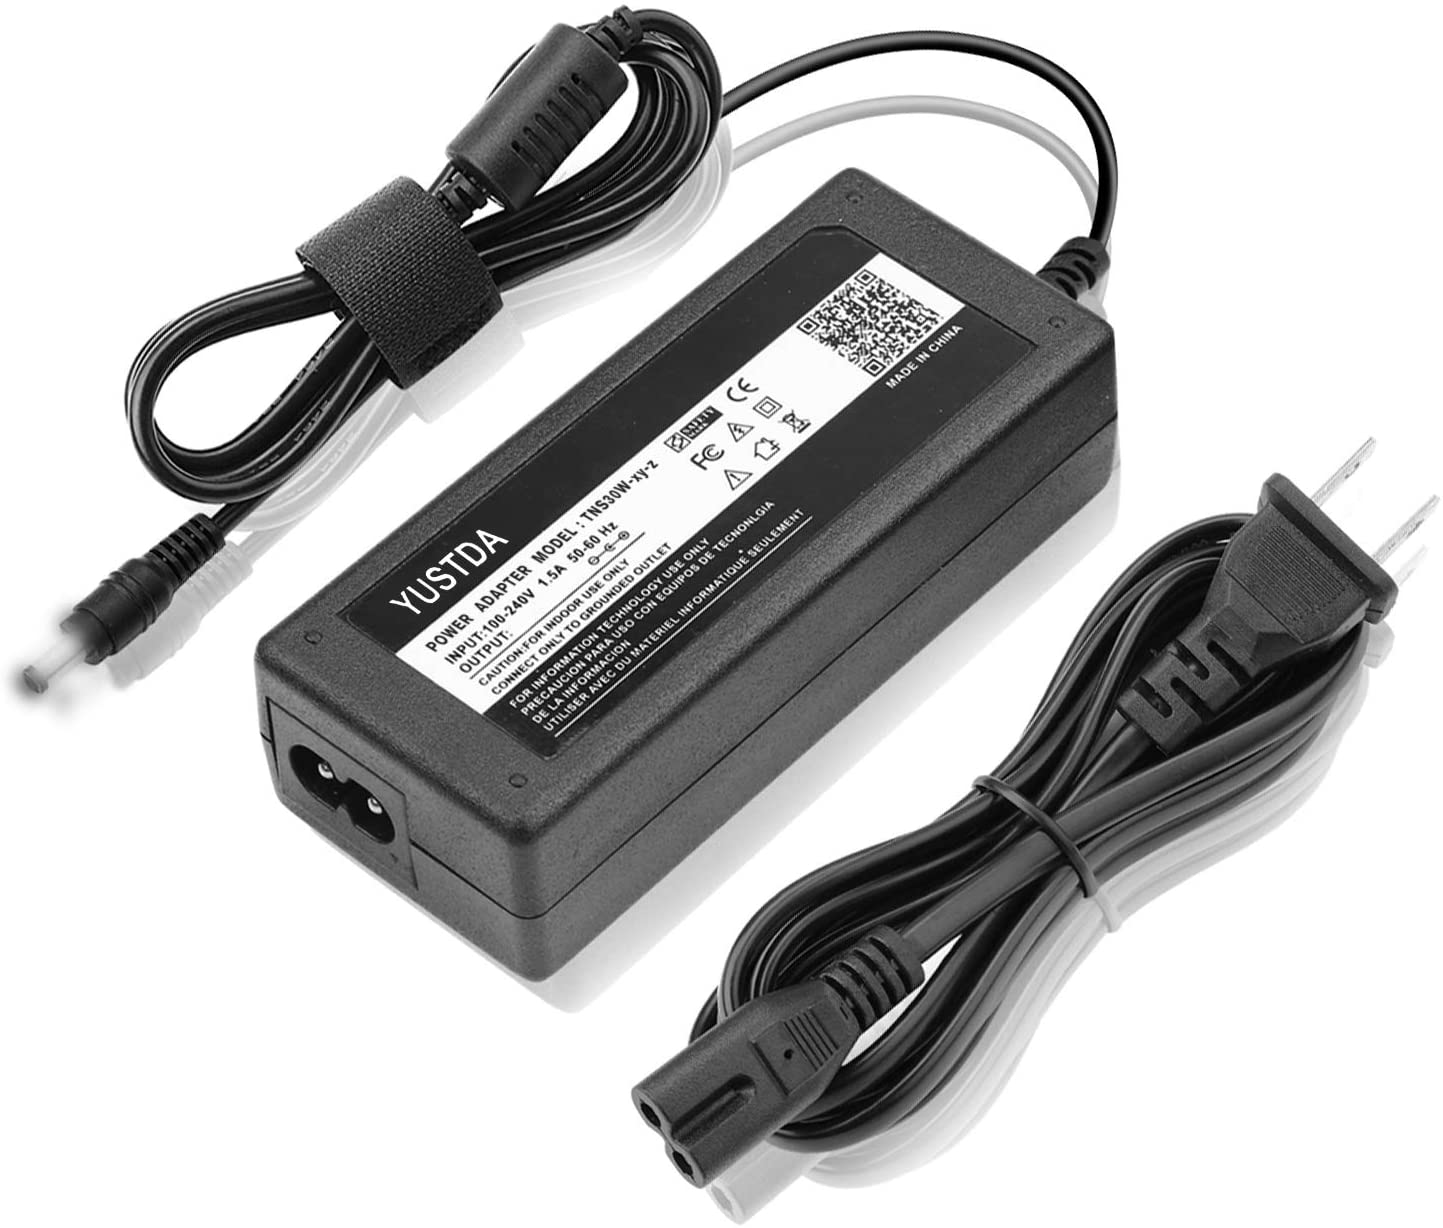 AC Power Adapter Replacement for Planar Systems PXL2770MW 997-7412-00 PLL2210MW PLL2210MW-WH 997-6404-00 997-6501-00 LE22AW PXL2470MW 997-7346-00 LED LCD Monitor Power Supply - image 1 of 5